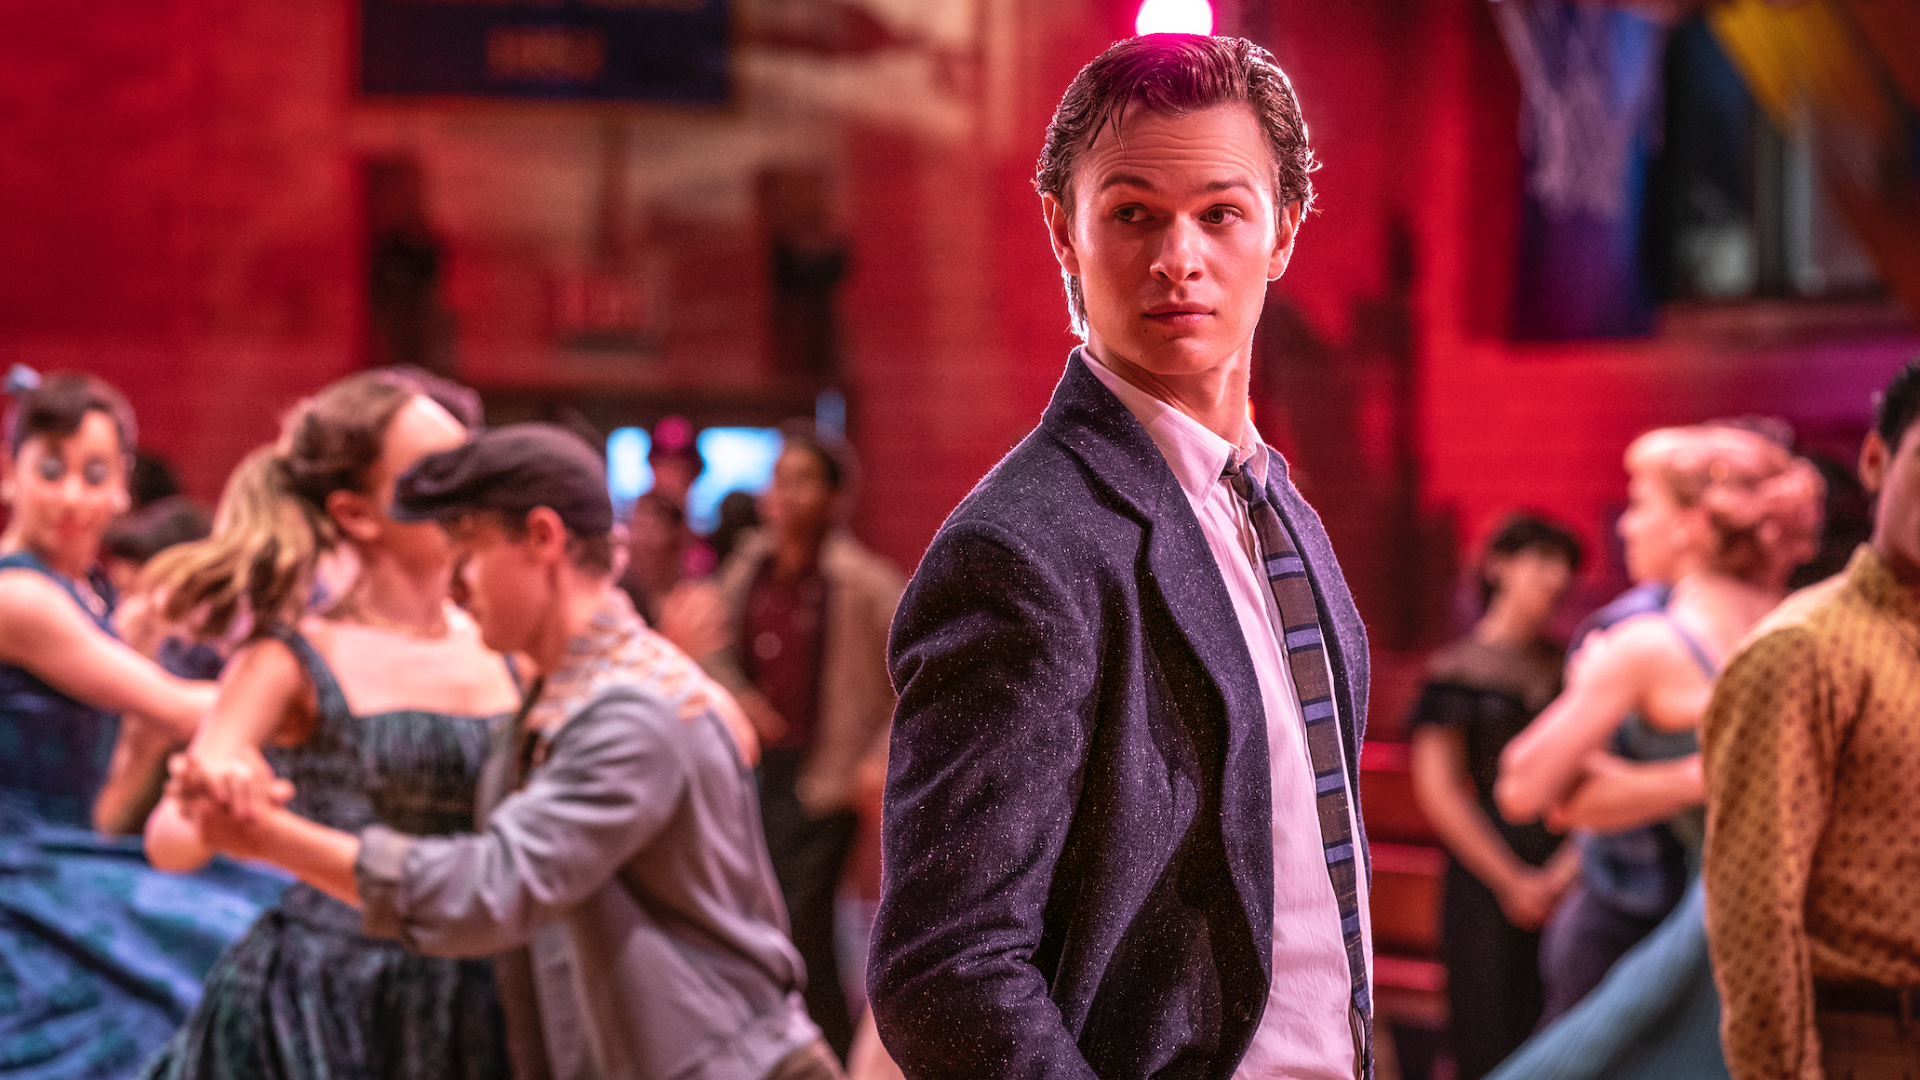 Ansel Elgort stands in a blazer, while others dance around him in 'West Side Story.'